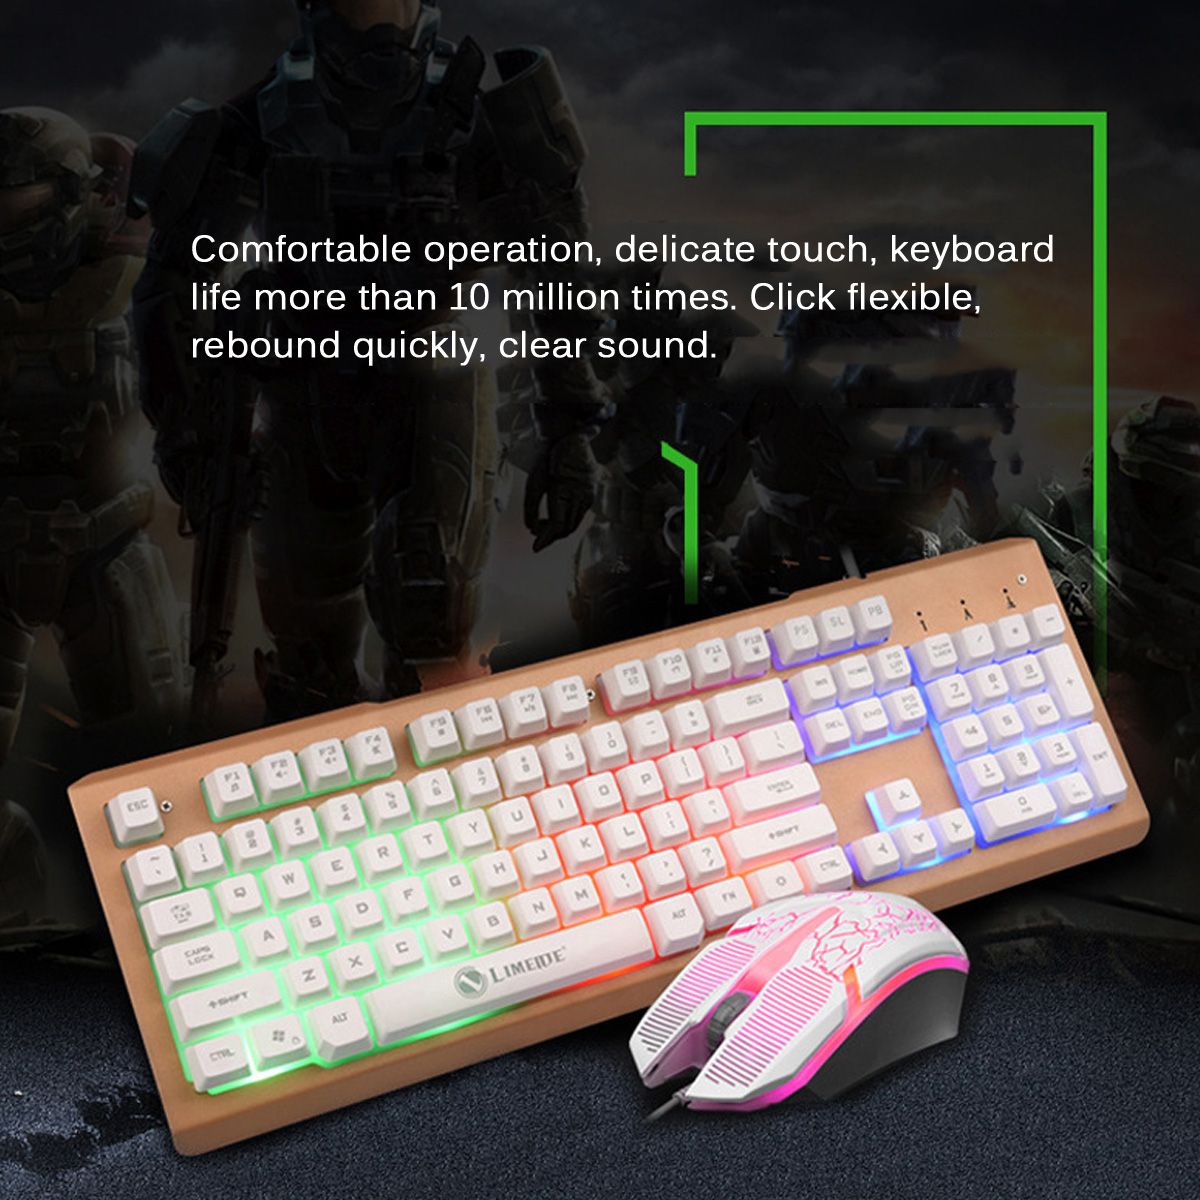 Colorful-Backlight-USB-Wired-Gaming-Keyboard-2400DPI-LED-Gaming-Mouse-Combo-for-PC-Game-E-sports-1588915